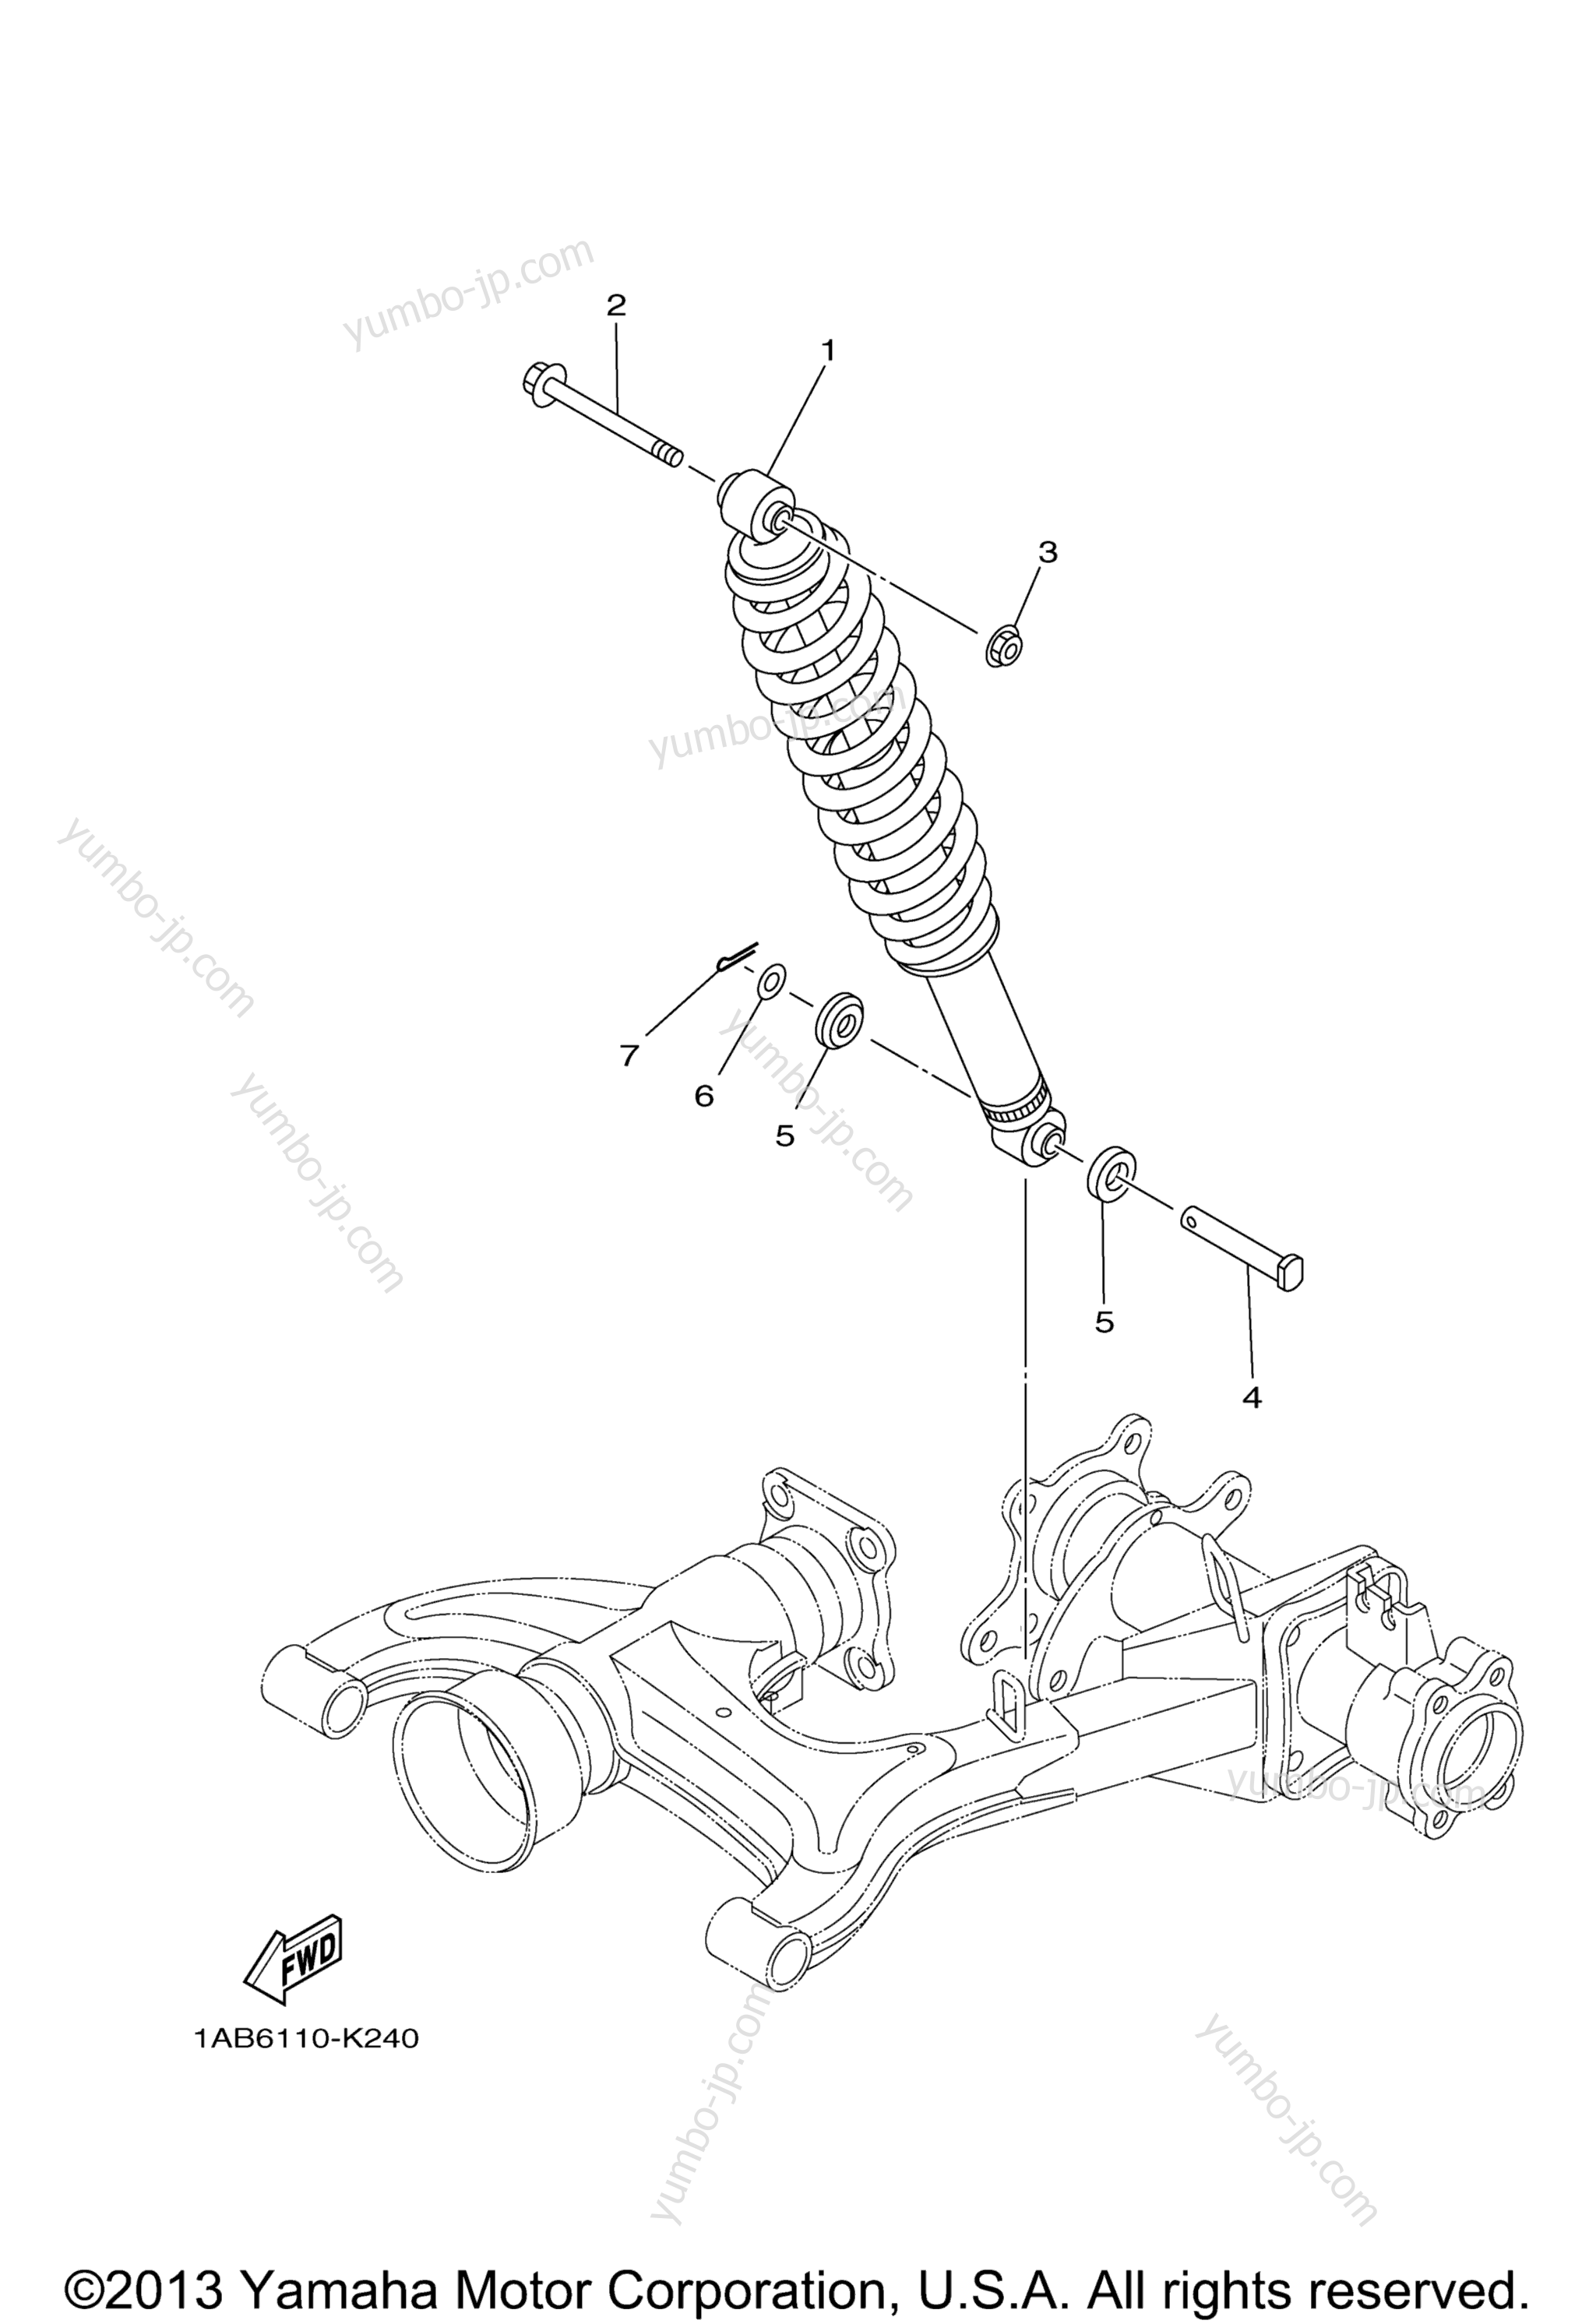 Rear Suspension for ATVs YAMAHA GRIZZLY 350 4WD HUNTER (YFM35FGHA) 2011 year